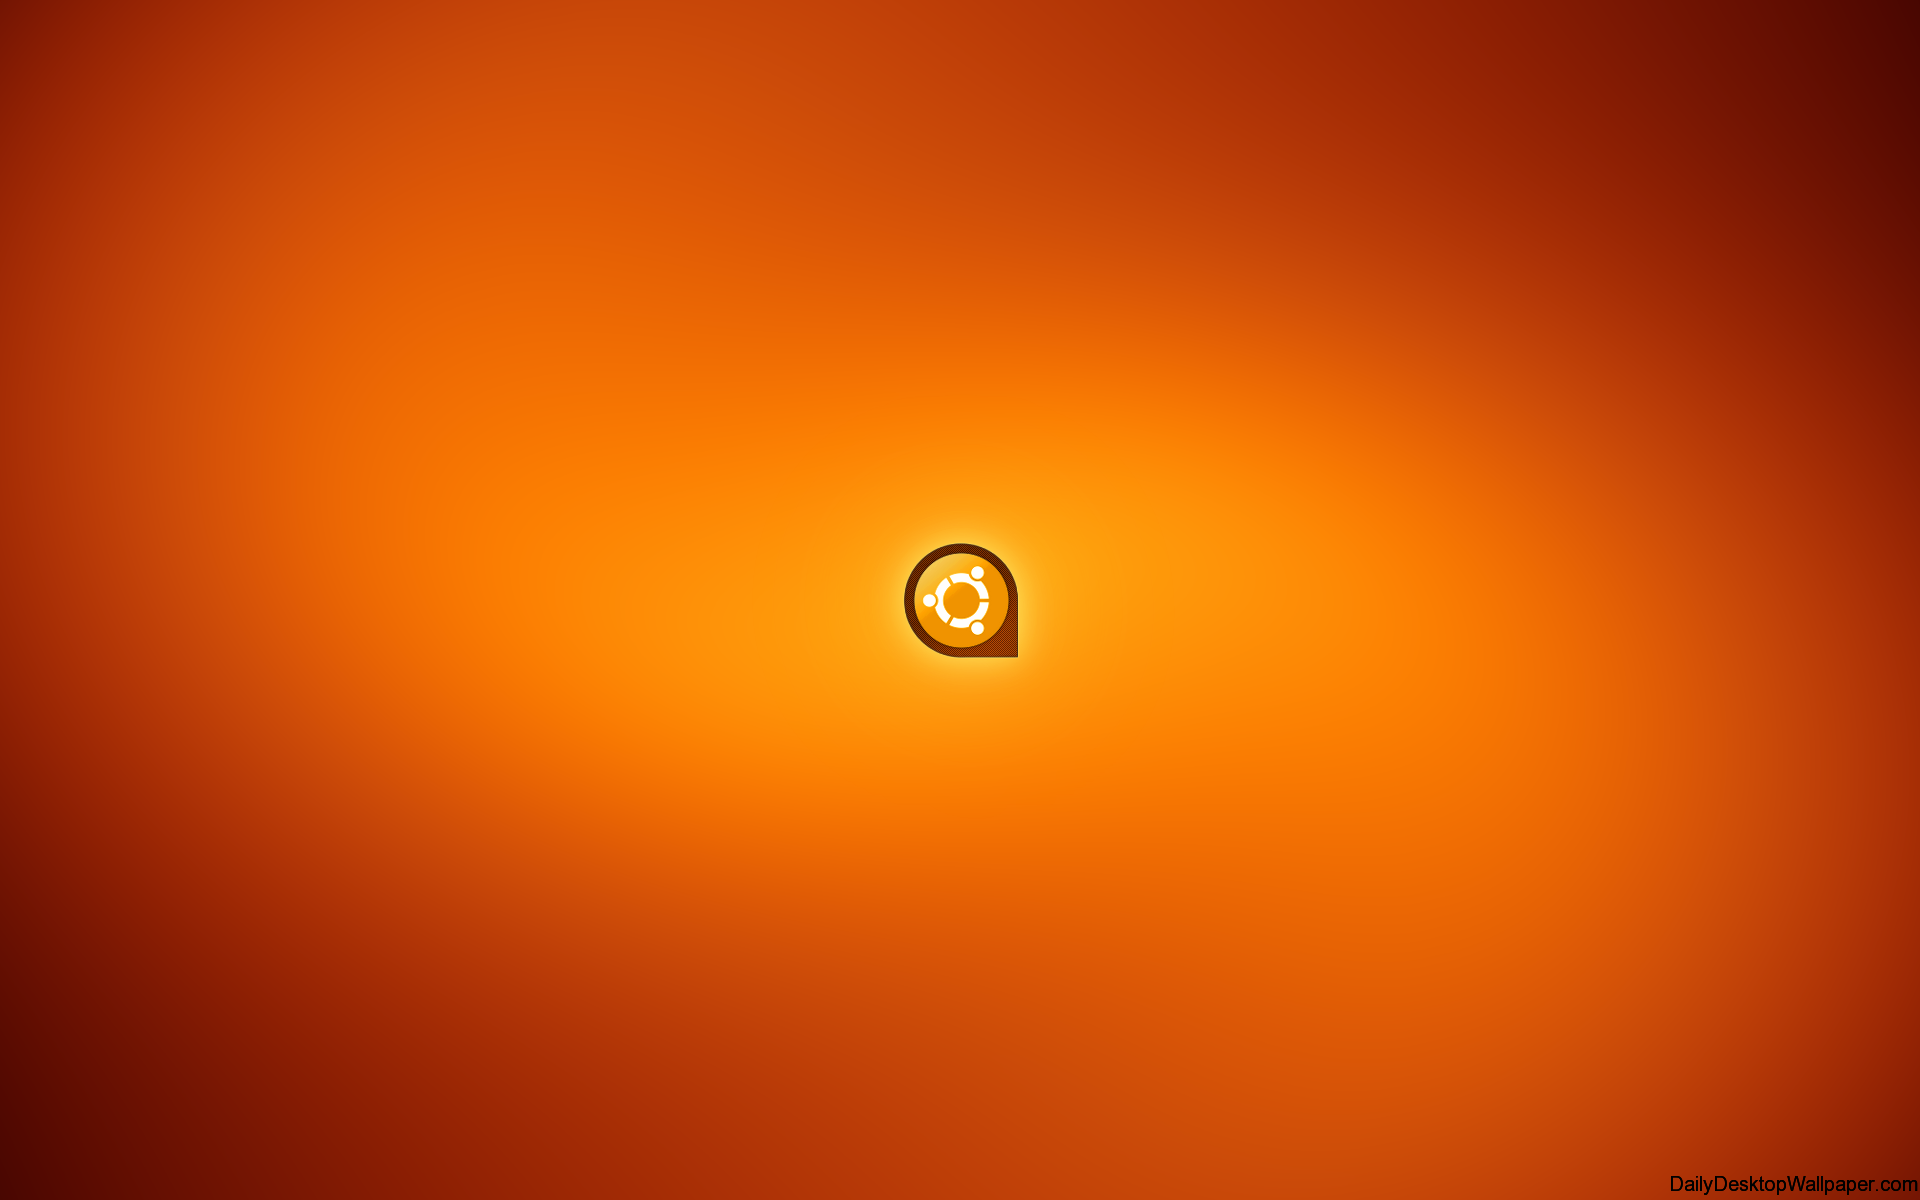 Bright Neon Orange Wallpaper This wallpaper is simple and